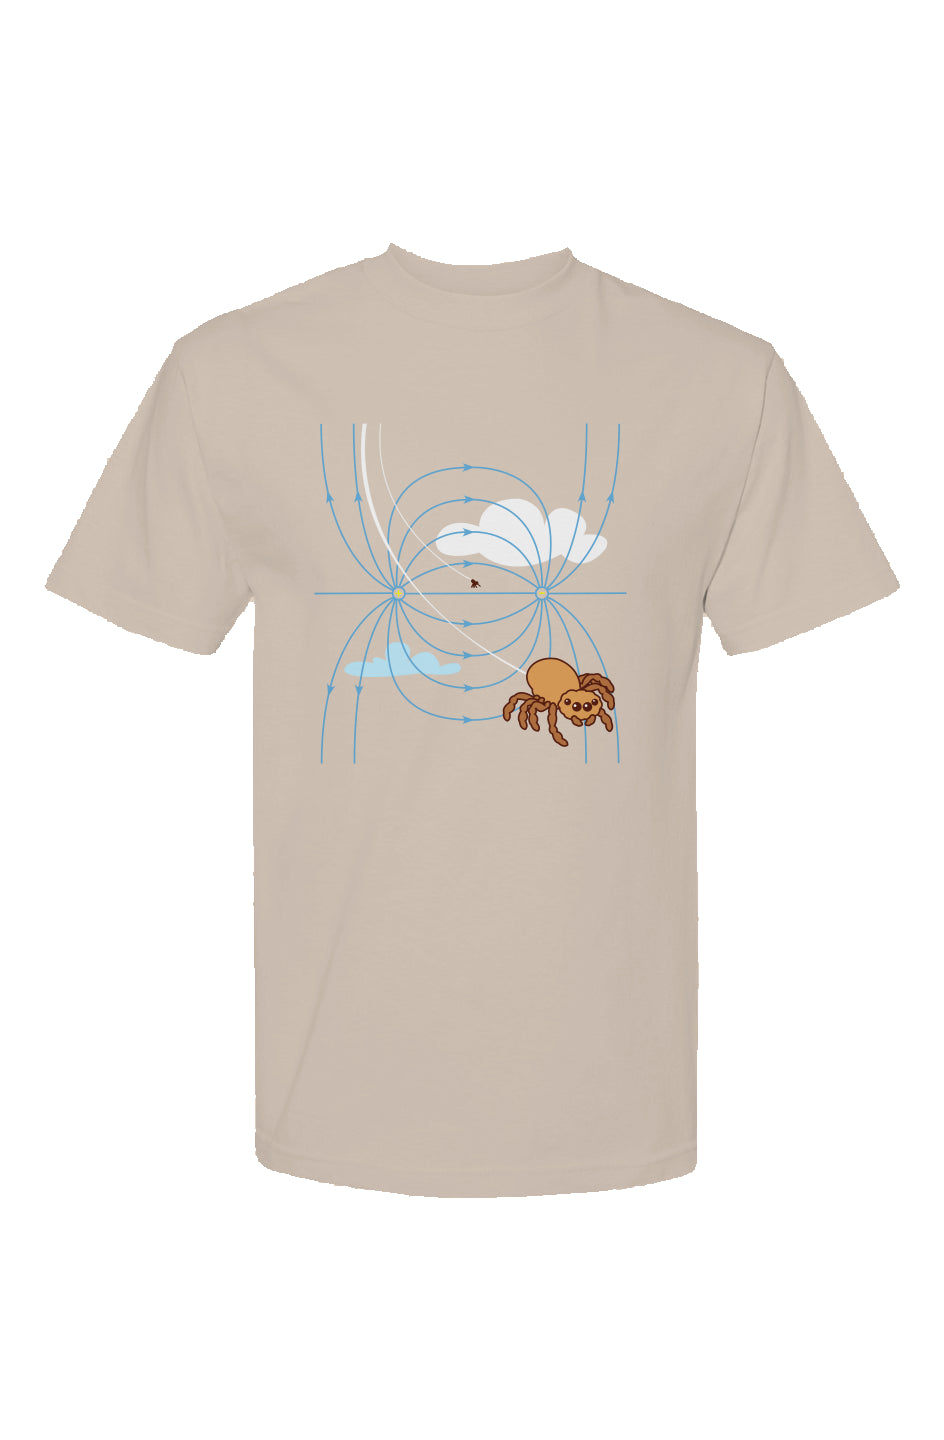 Spiders in the atmosphere Tee - Sand